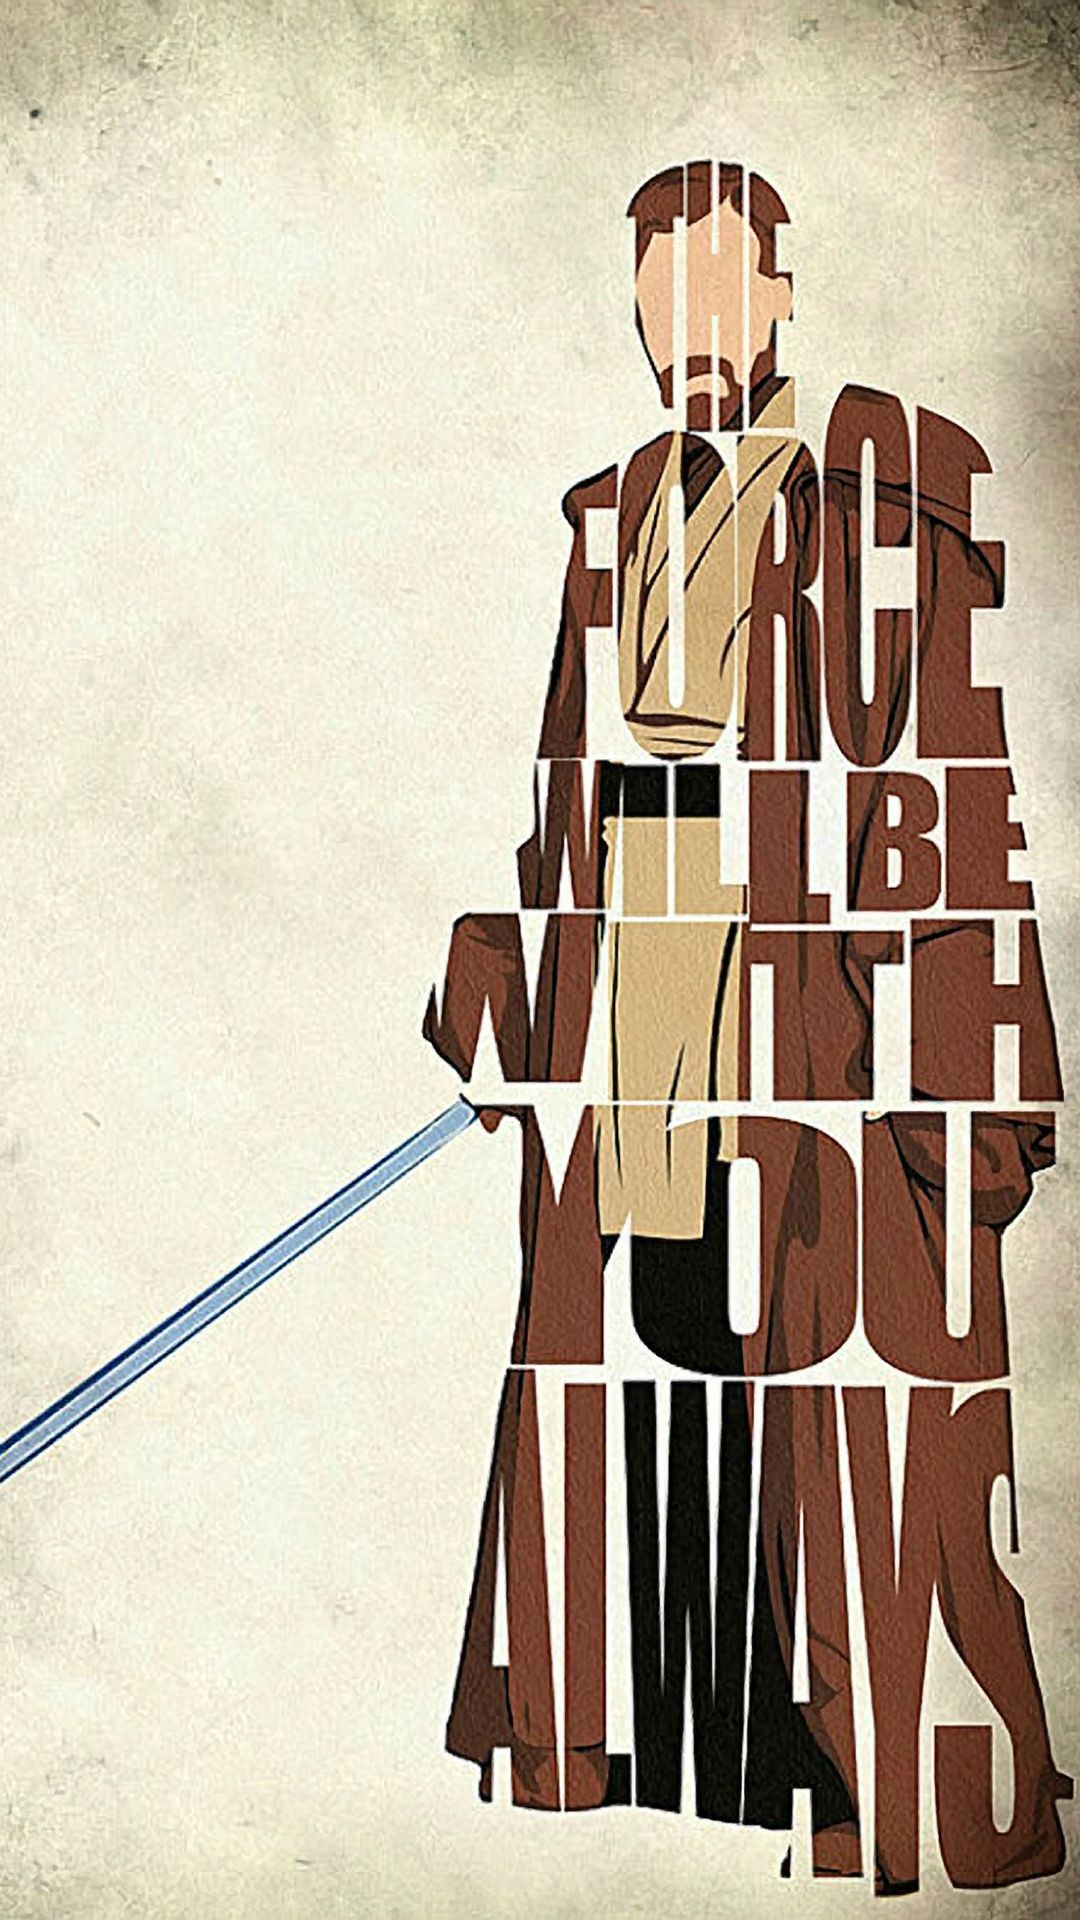 Star Wars phone wallpaper ·① Download free wallpapers for ...